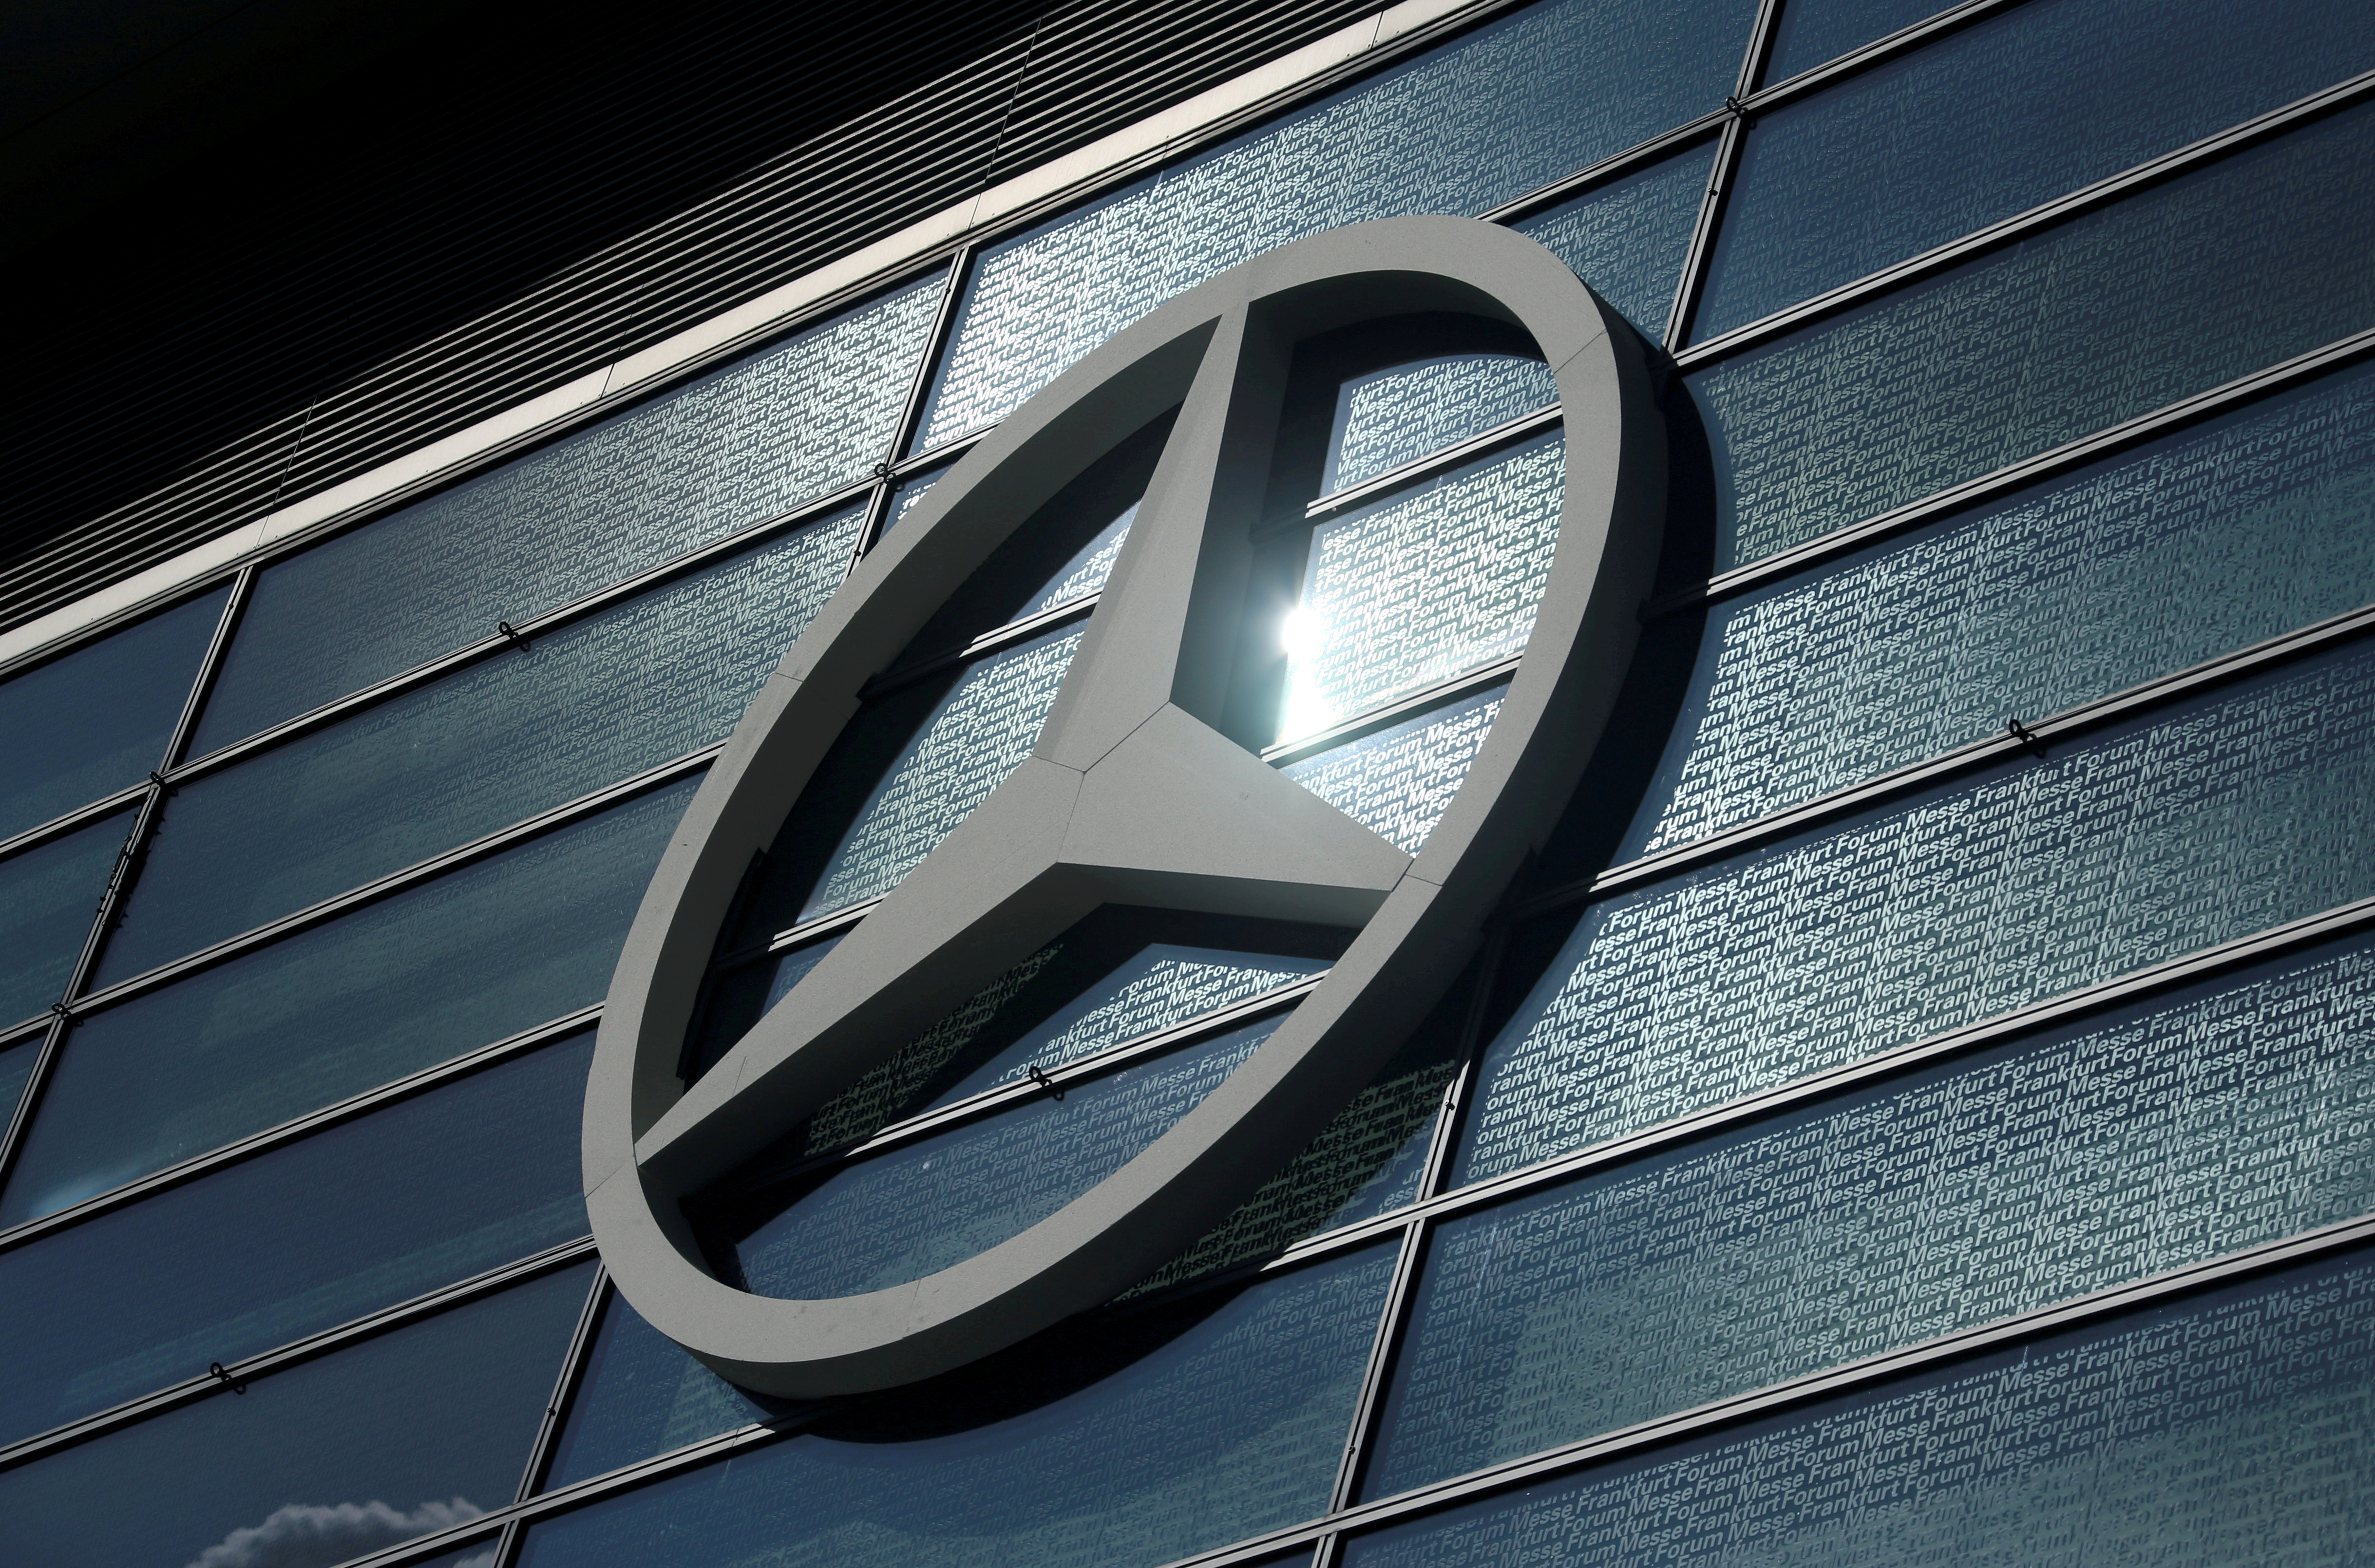 Mercedes Benz Usa Accidentally Puts Out Data From Nearly 1 000 Customers Reuters